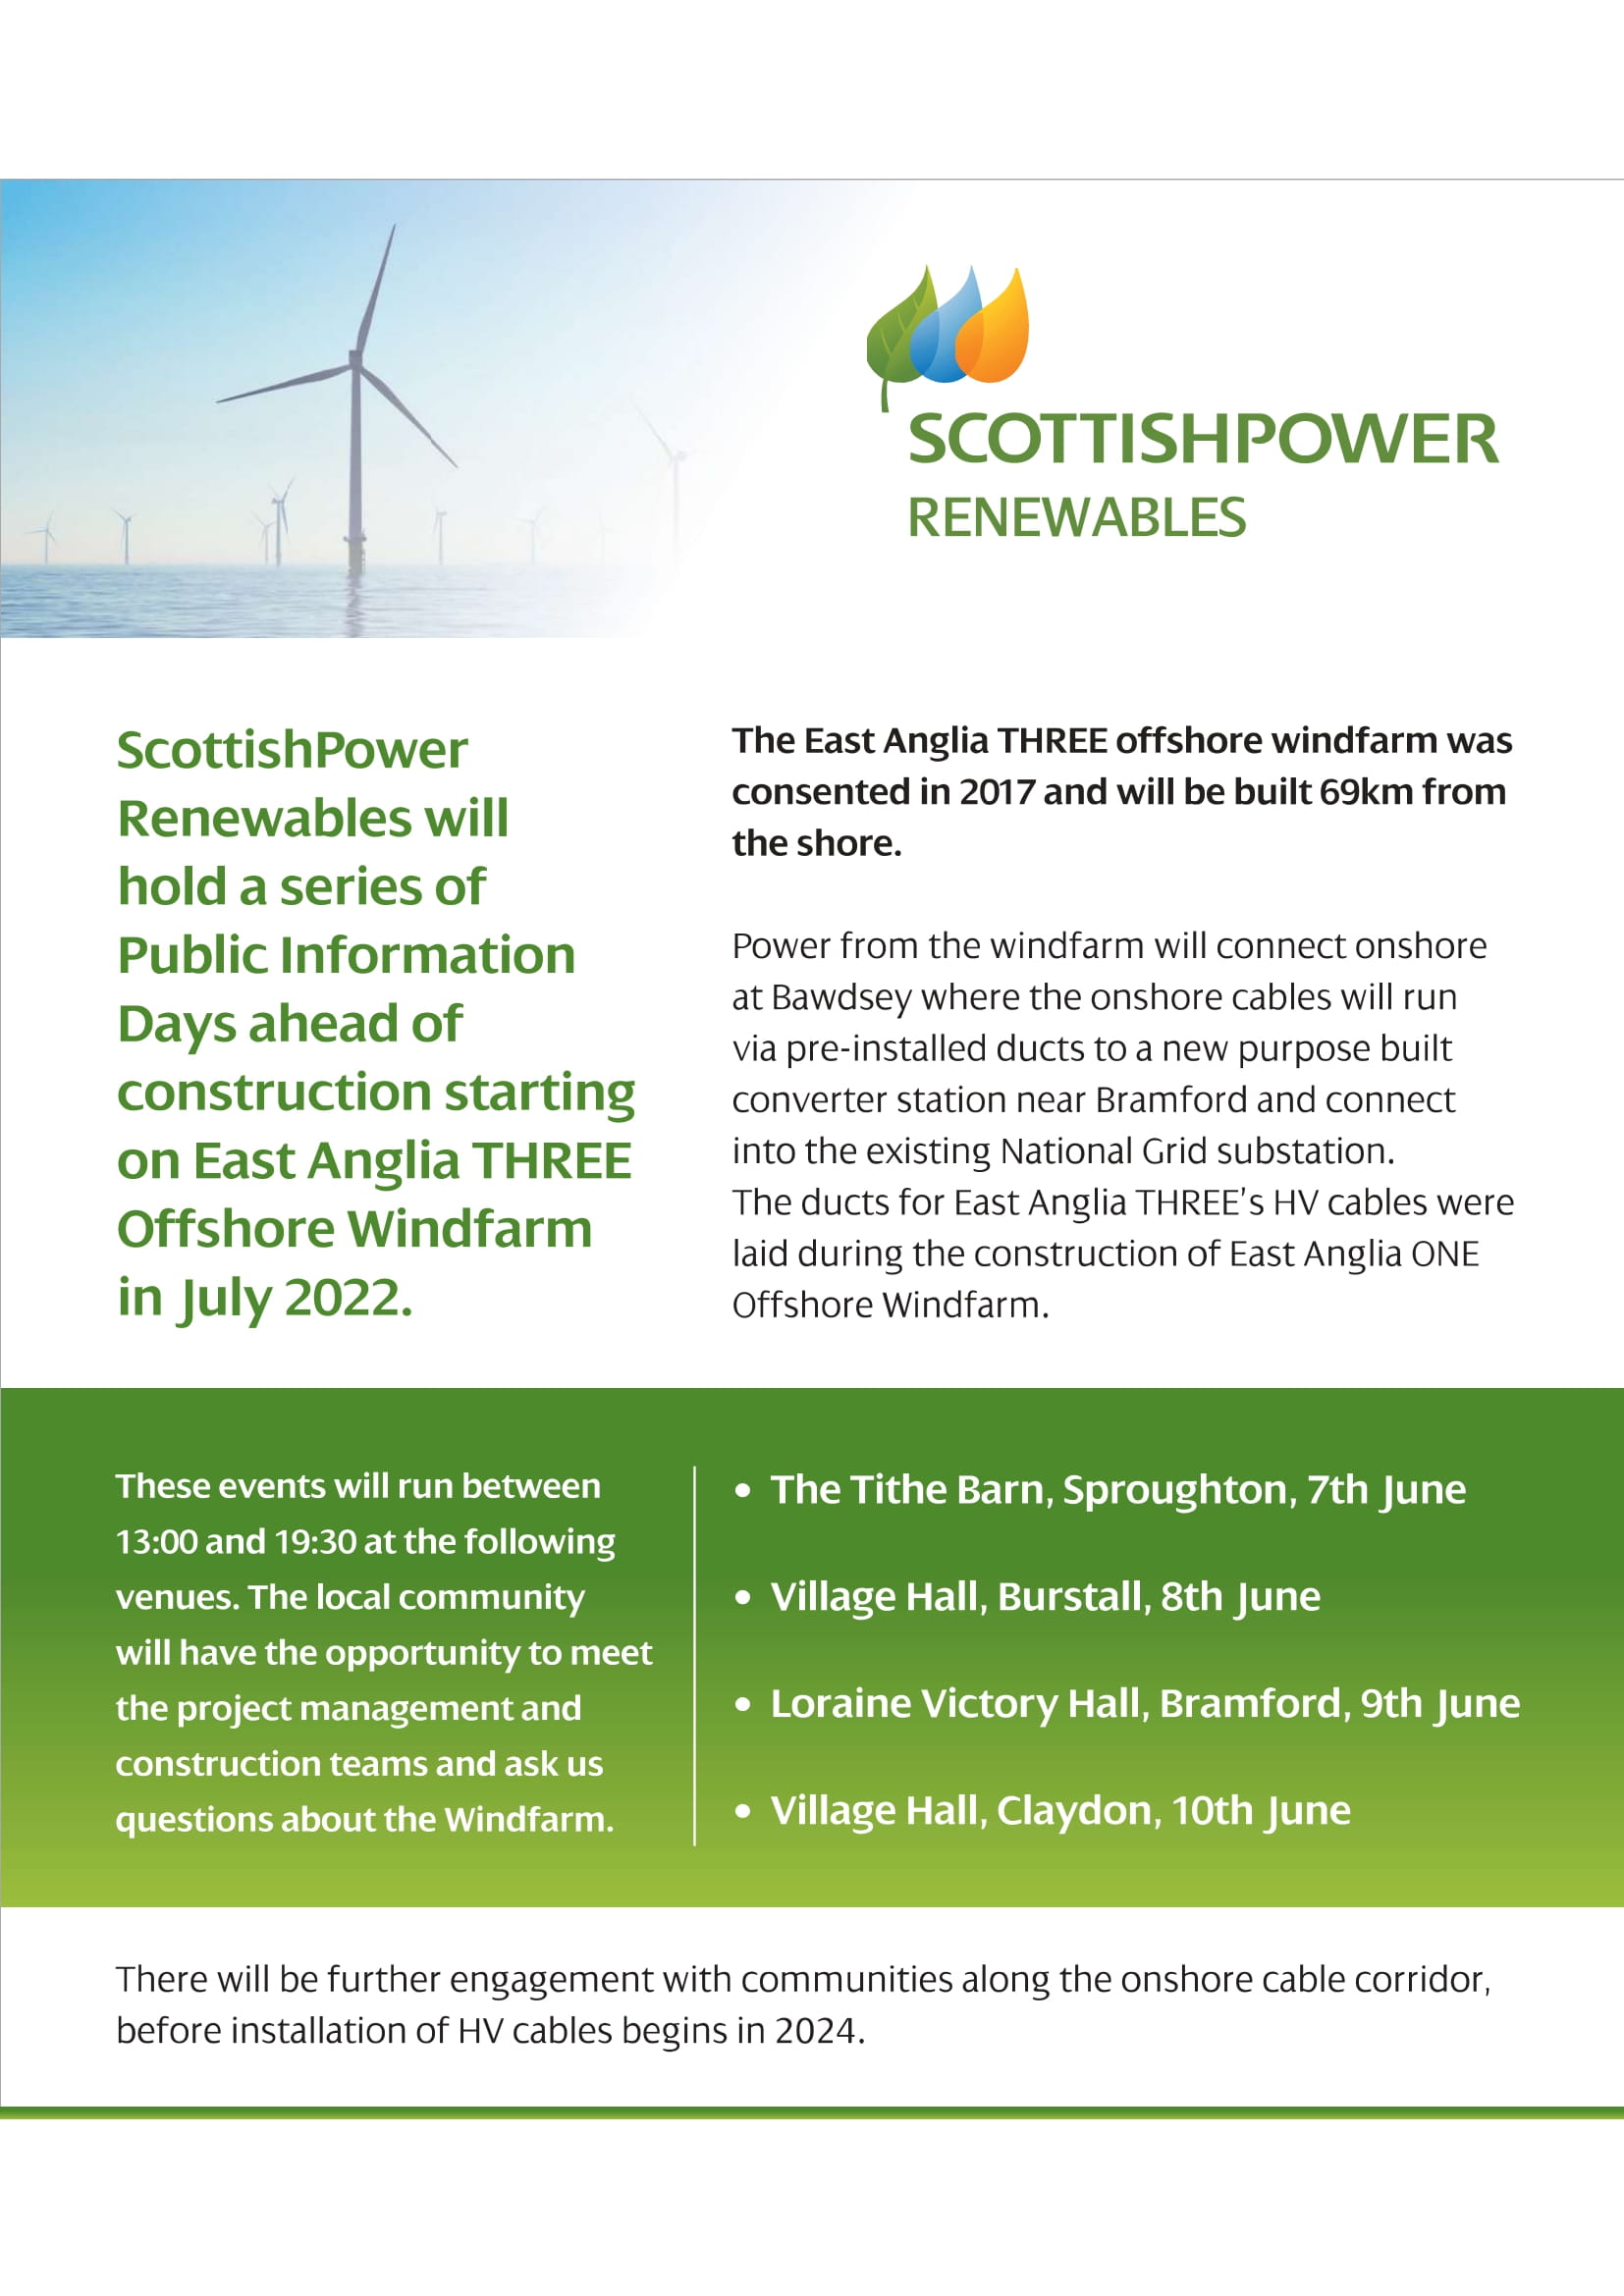 10th June Information Event by Scottish Power Renewables   